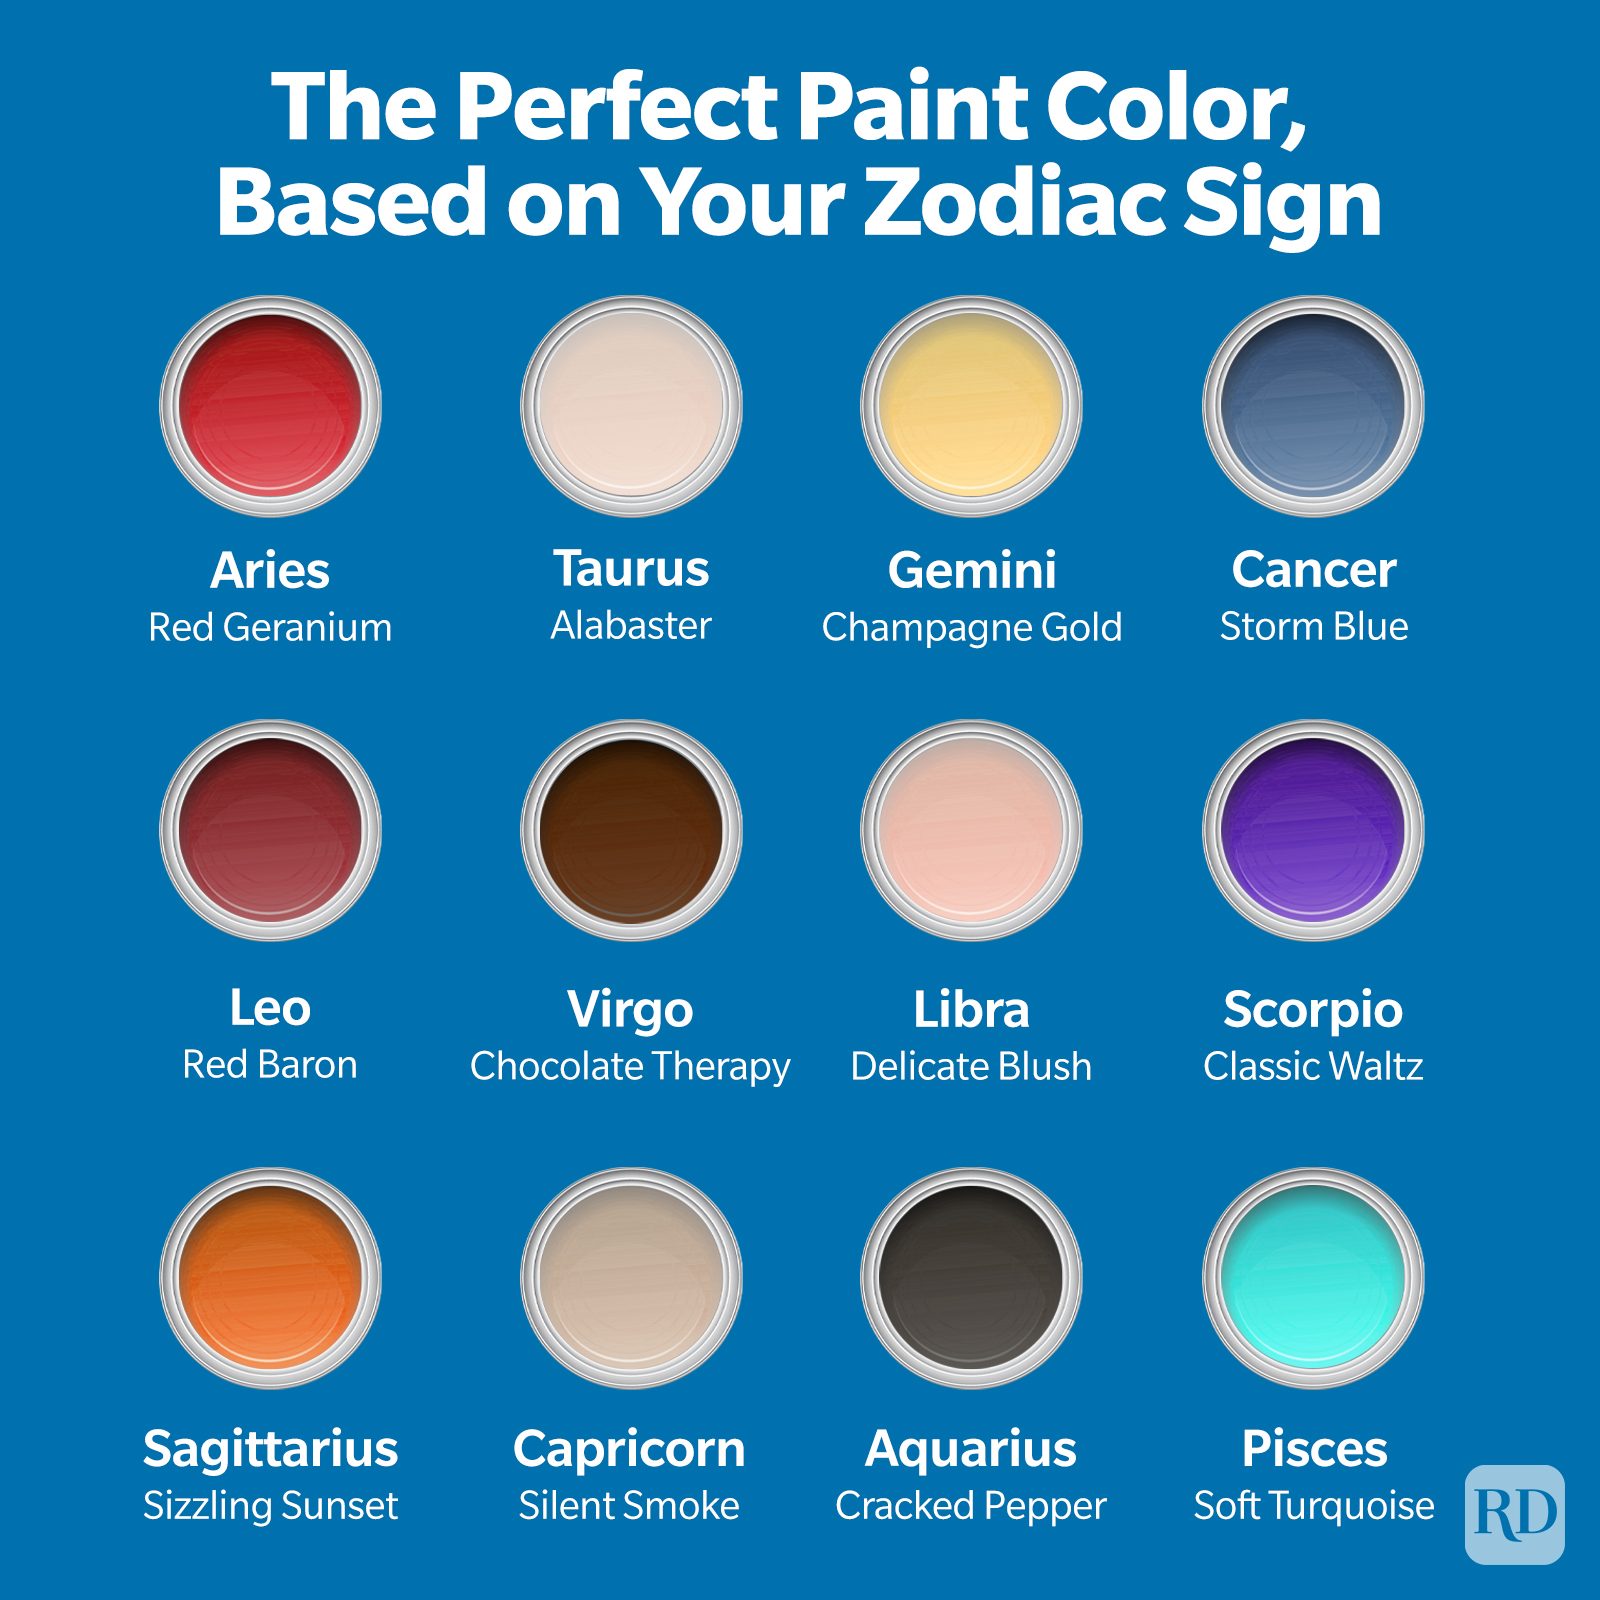 Here's the Perfect Paint Color for You, Based on Your Zodiac Sign